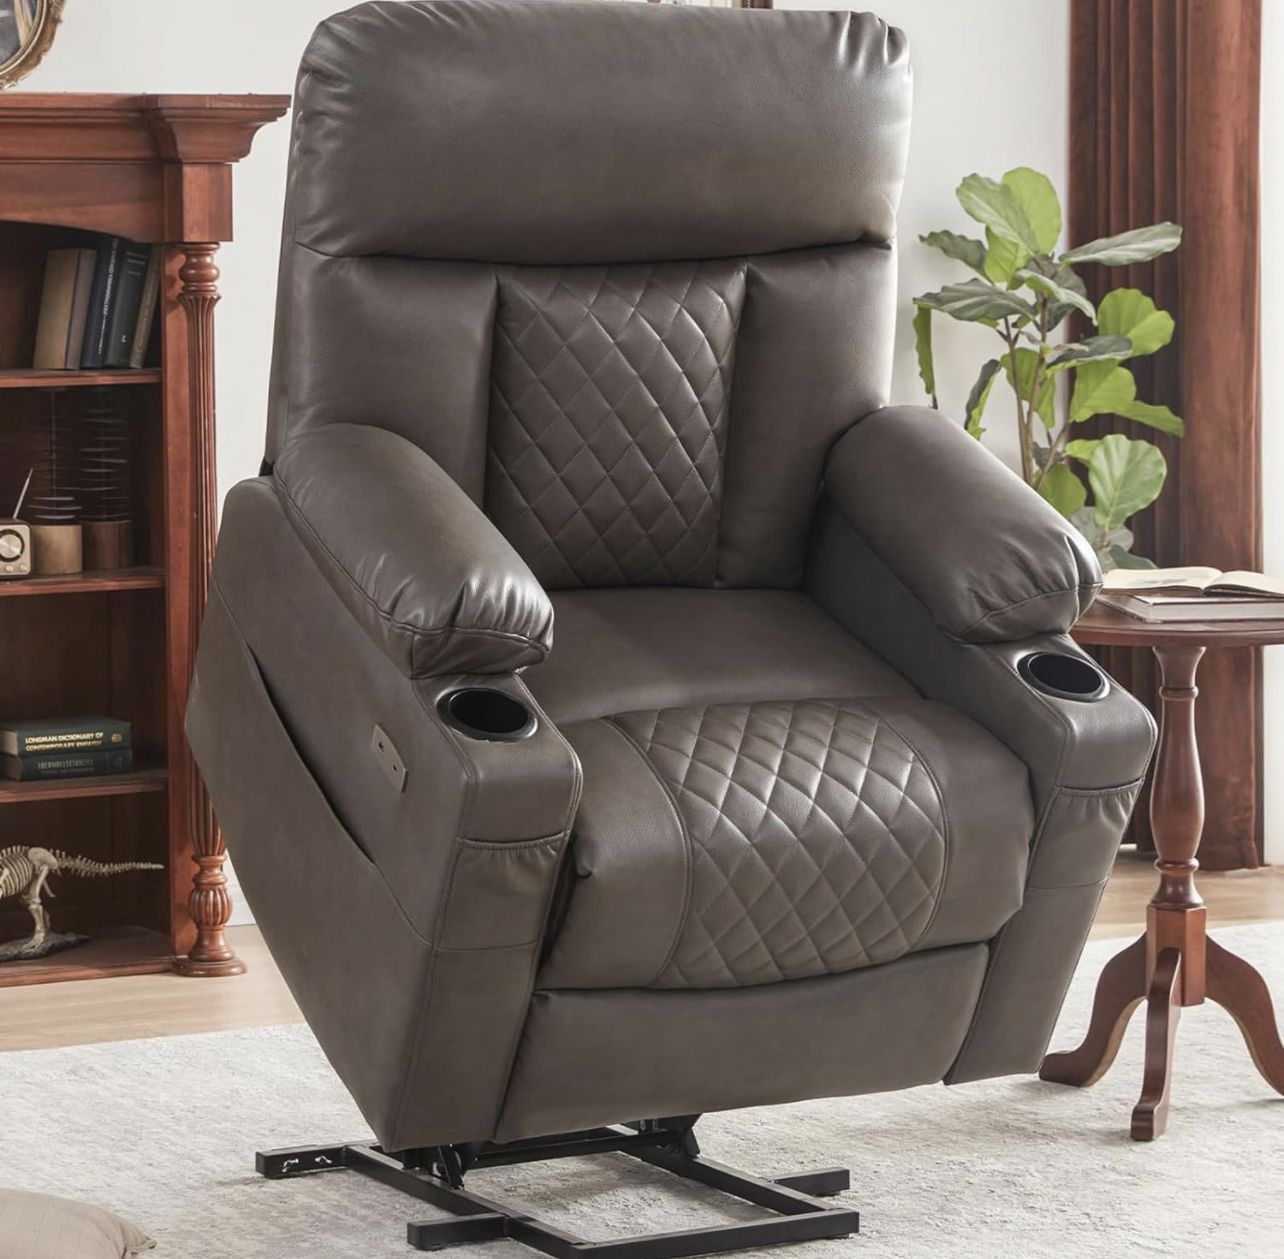 Dual Motor Lay Flat Power Lift Recliner Chair, One Touch Reset Power Recliner with Heat and Massage, Dual Motor Infinite Position with Cupholder, USB 